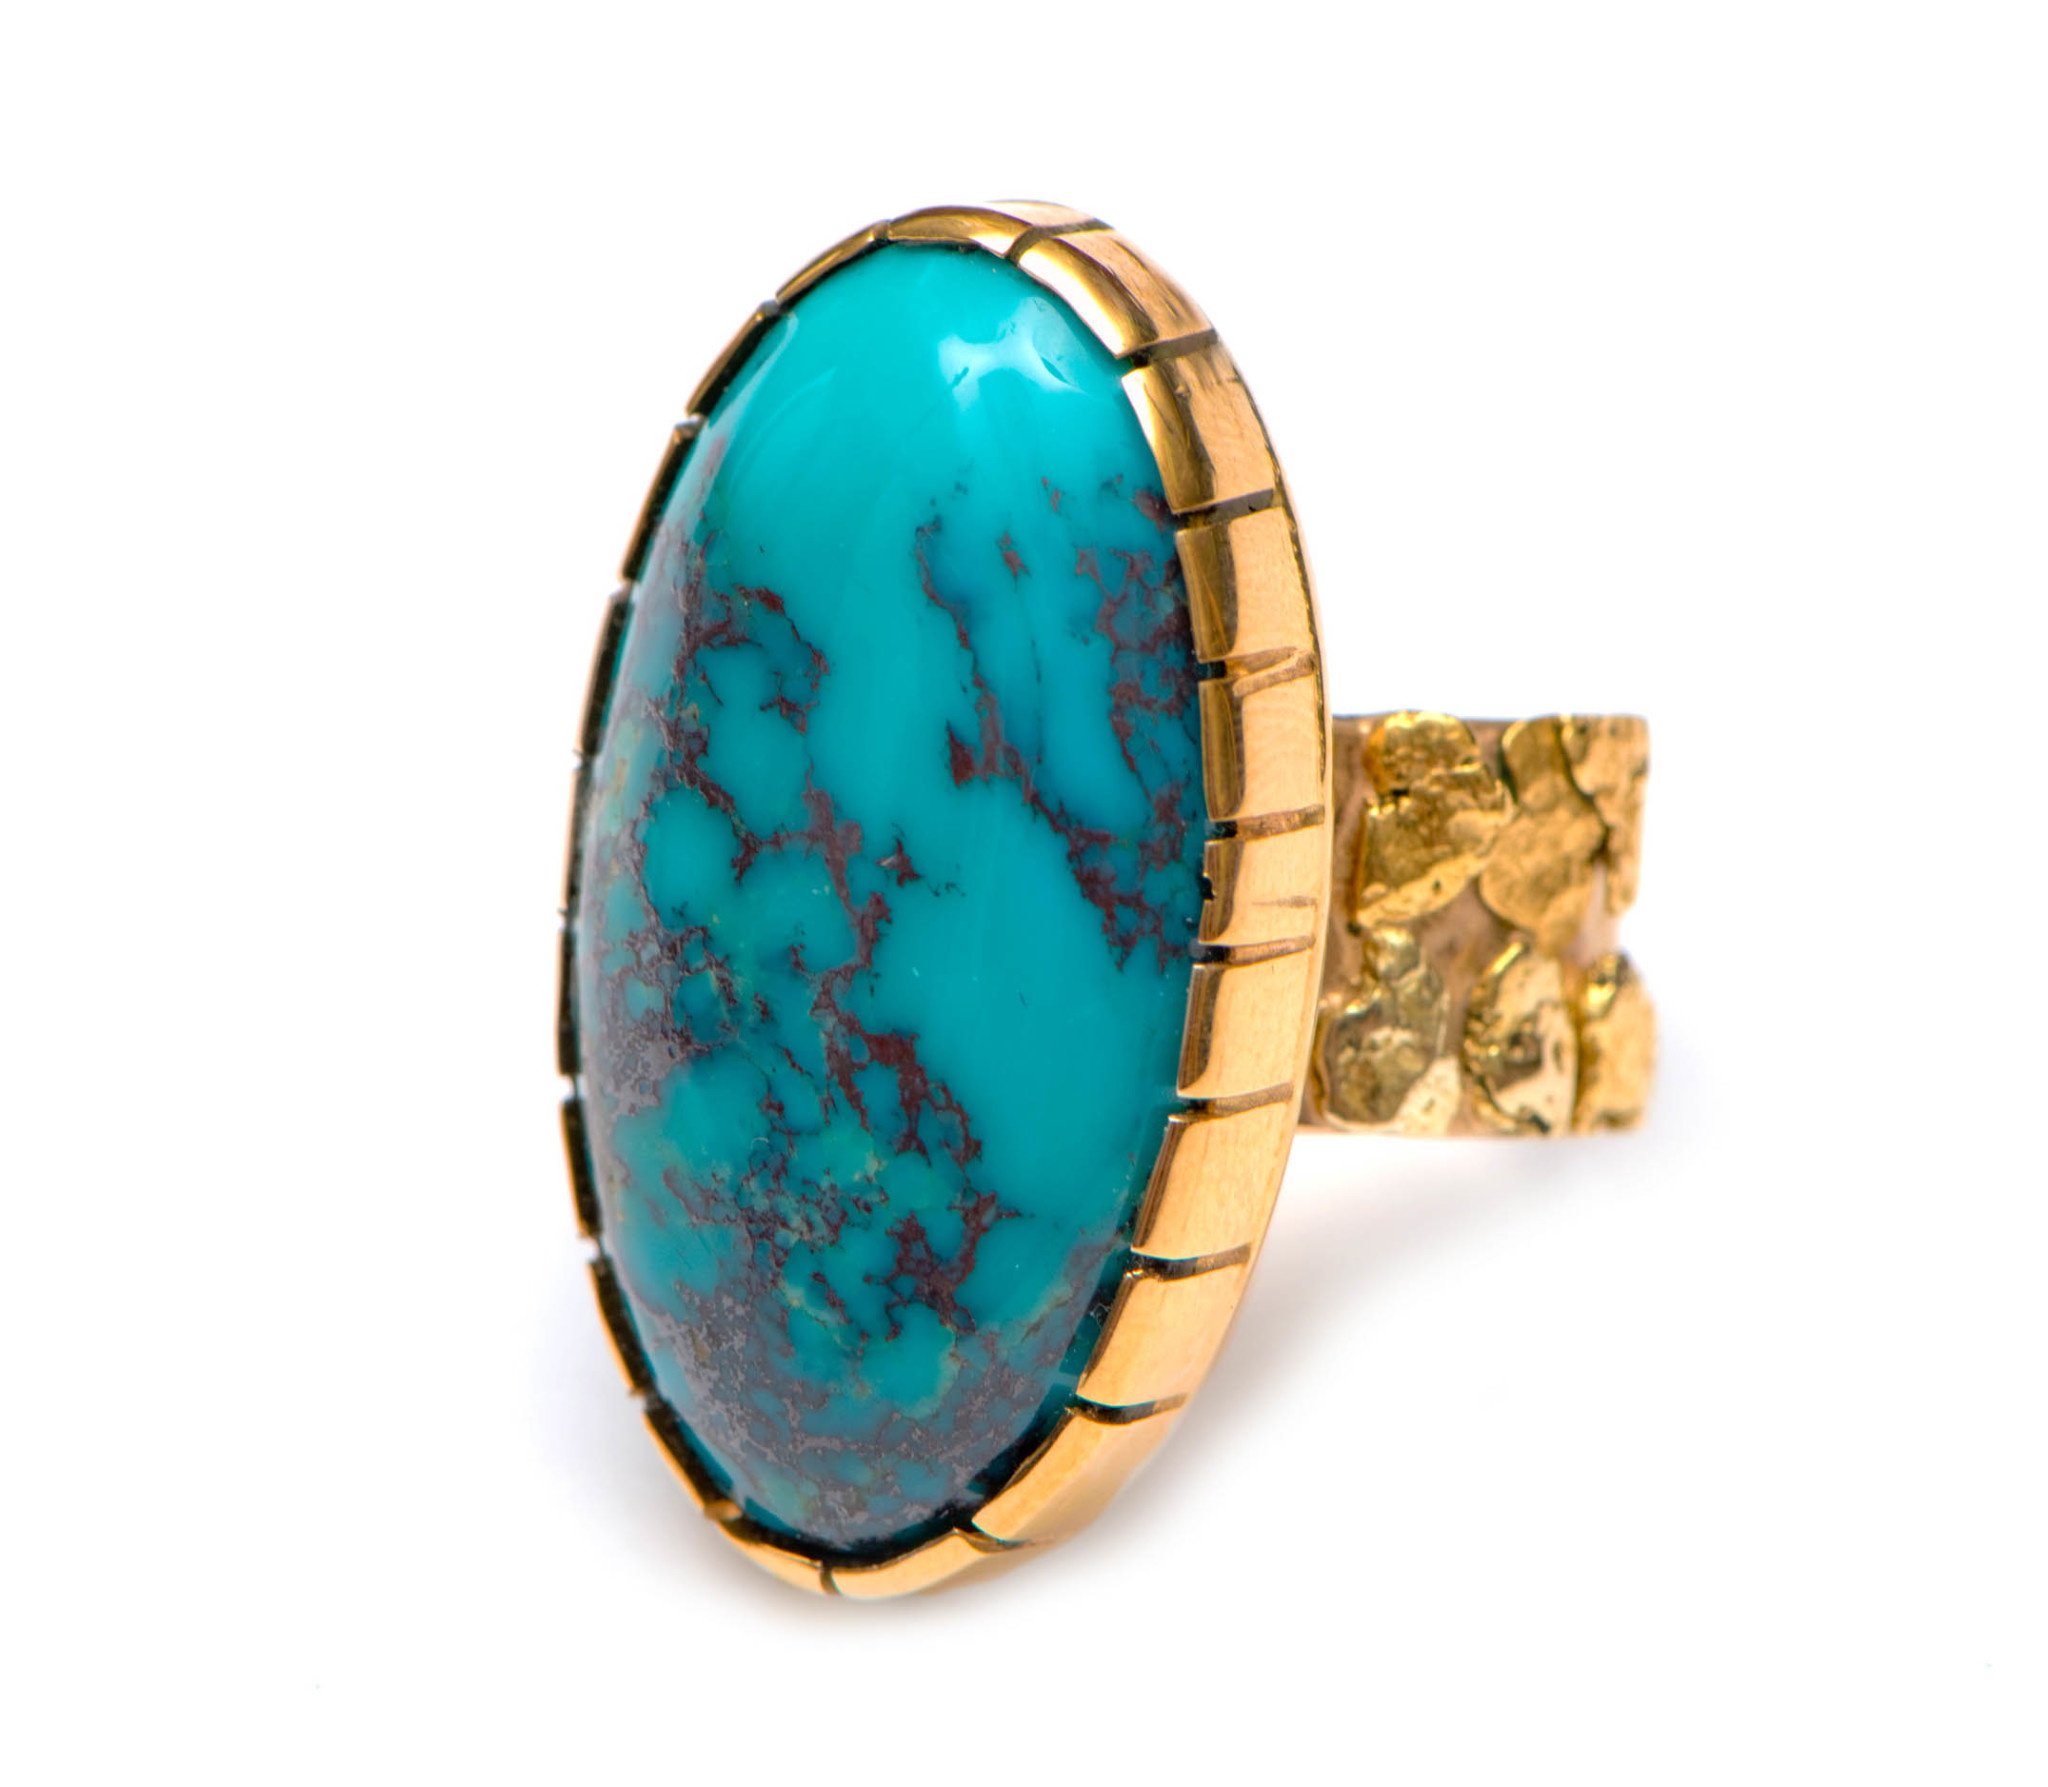 14Kt Gold Ring with Bisbee Turquoise by Terrence Campbell.